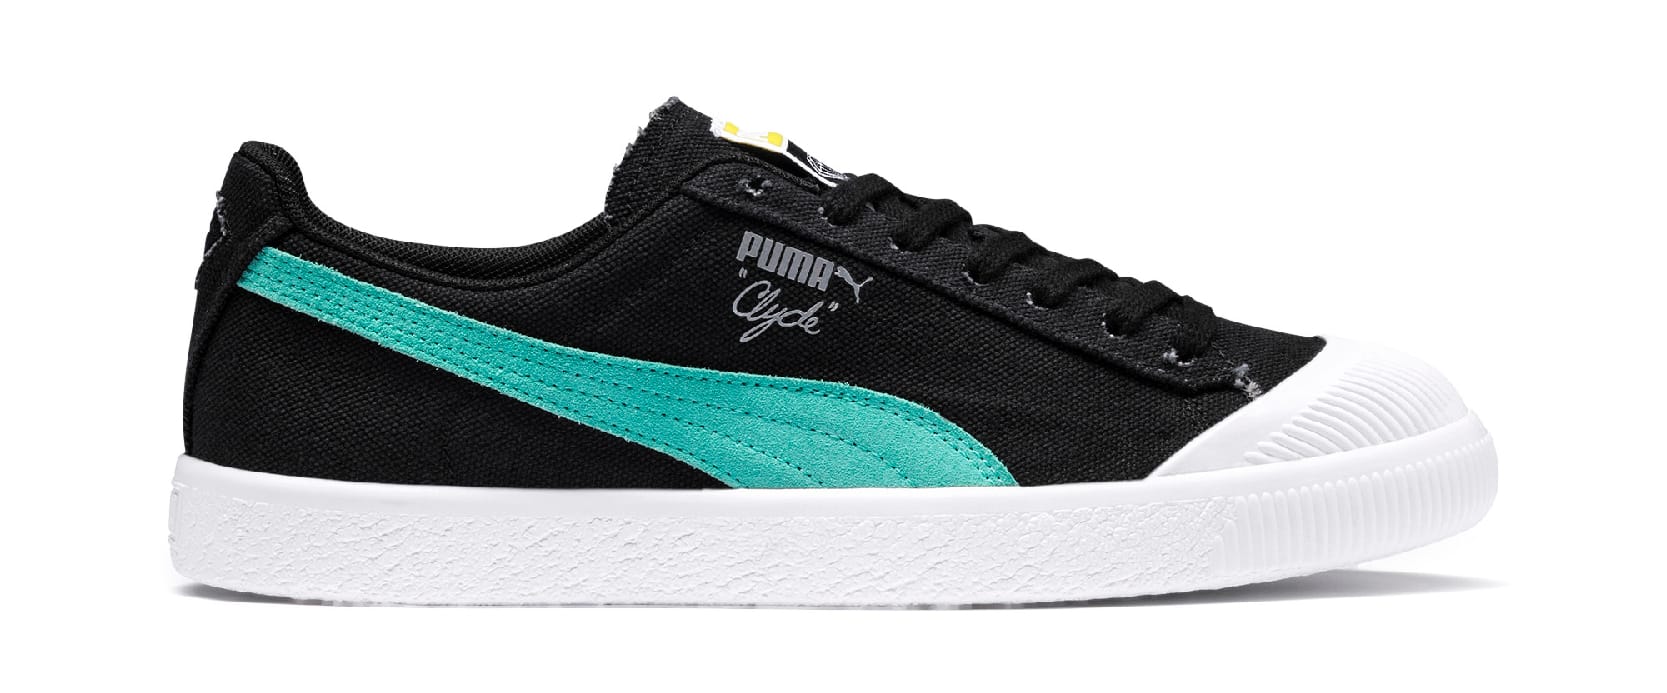 Diamond Supply Co. x Puma Clyde 369397 (Lateral)